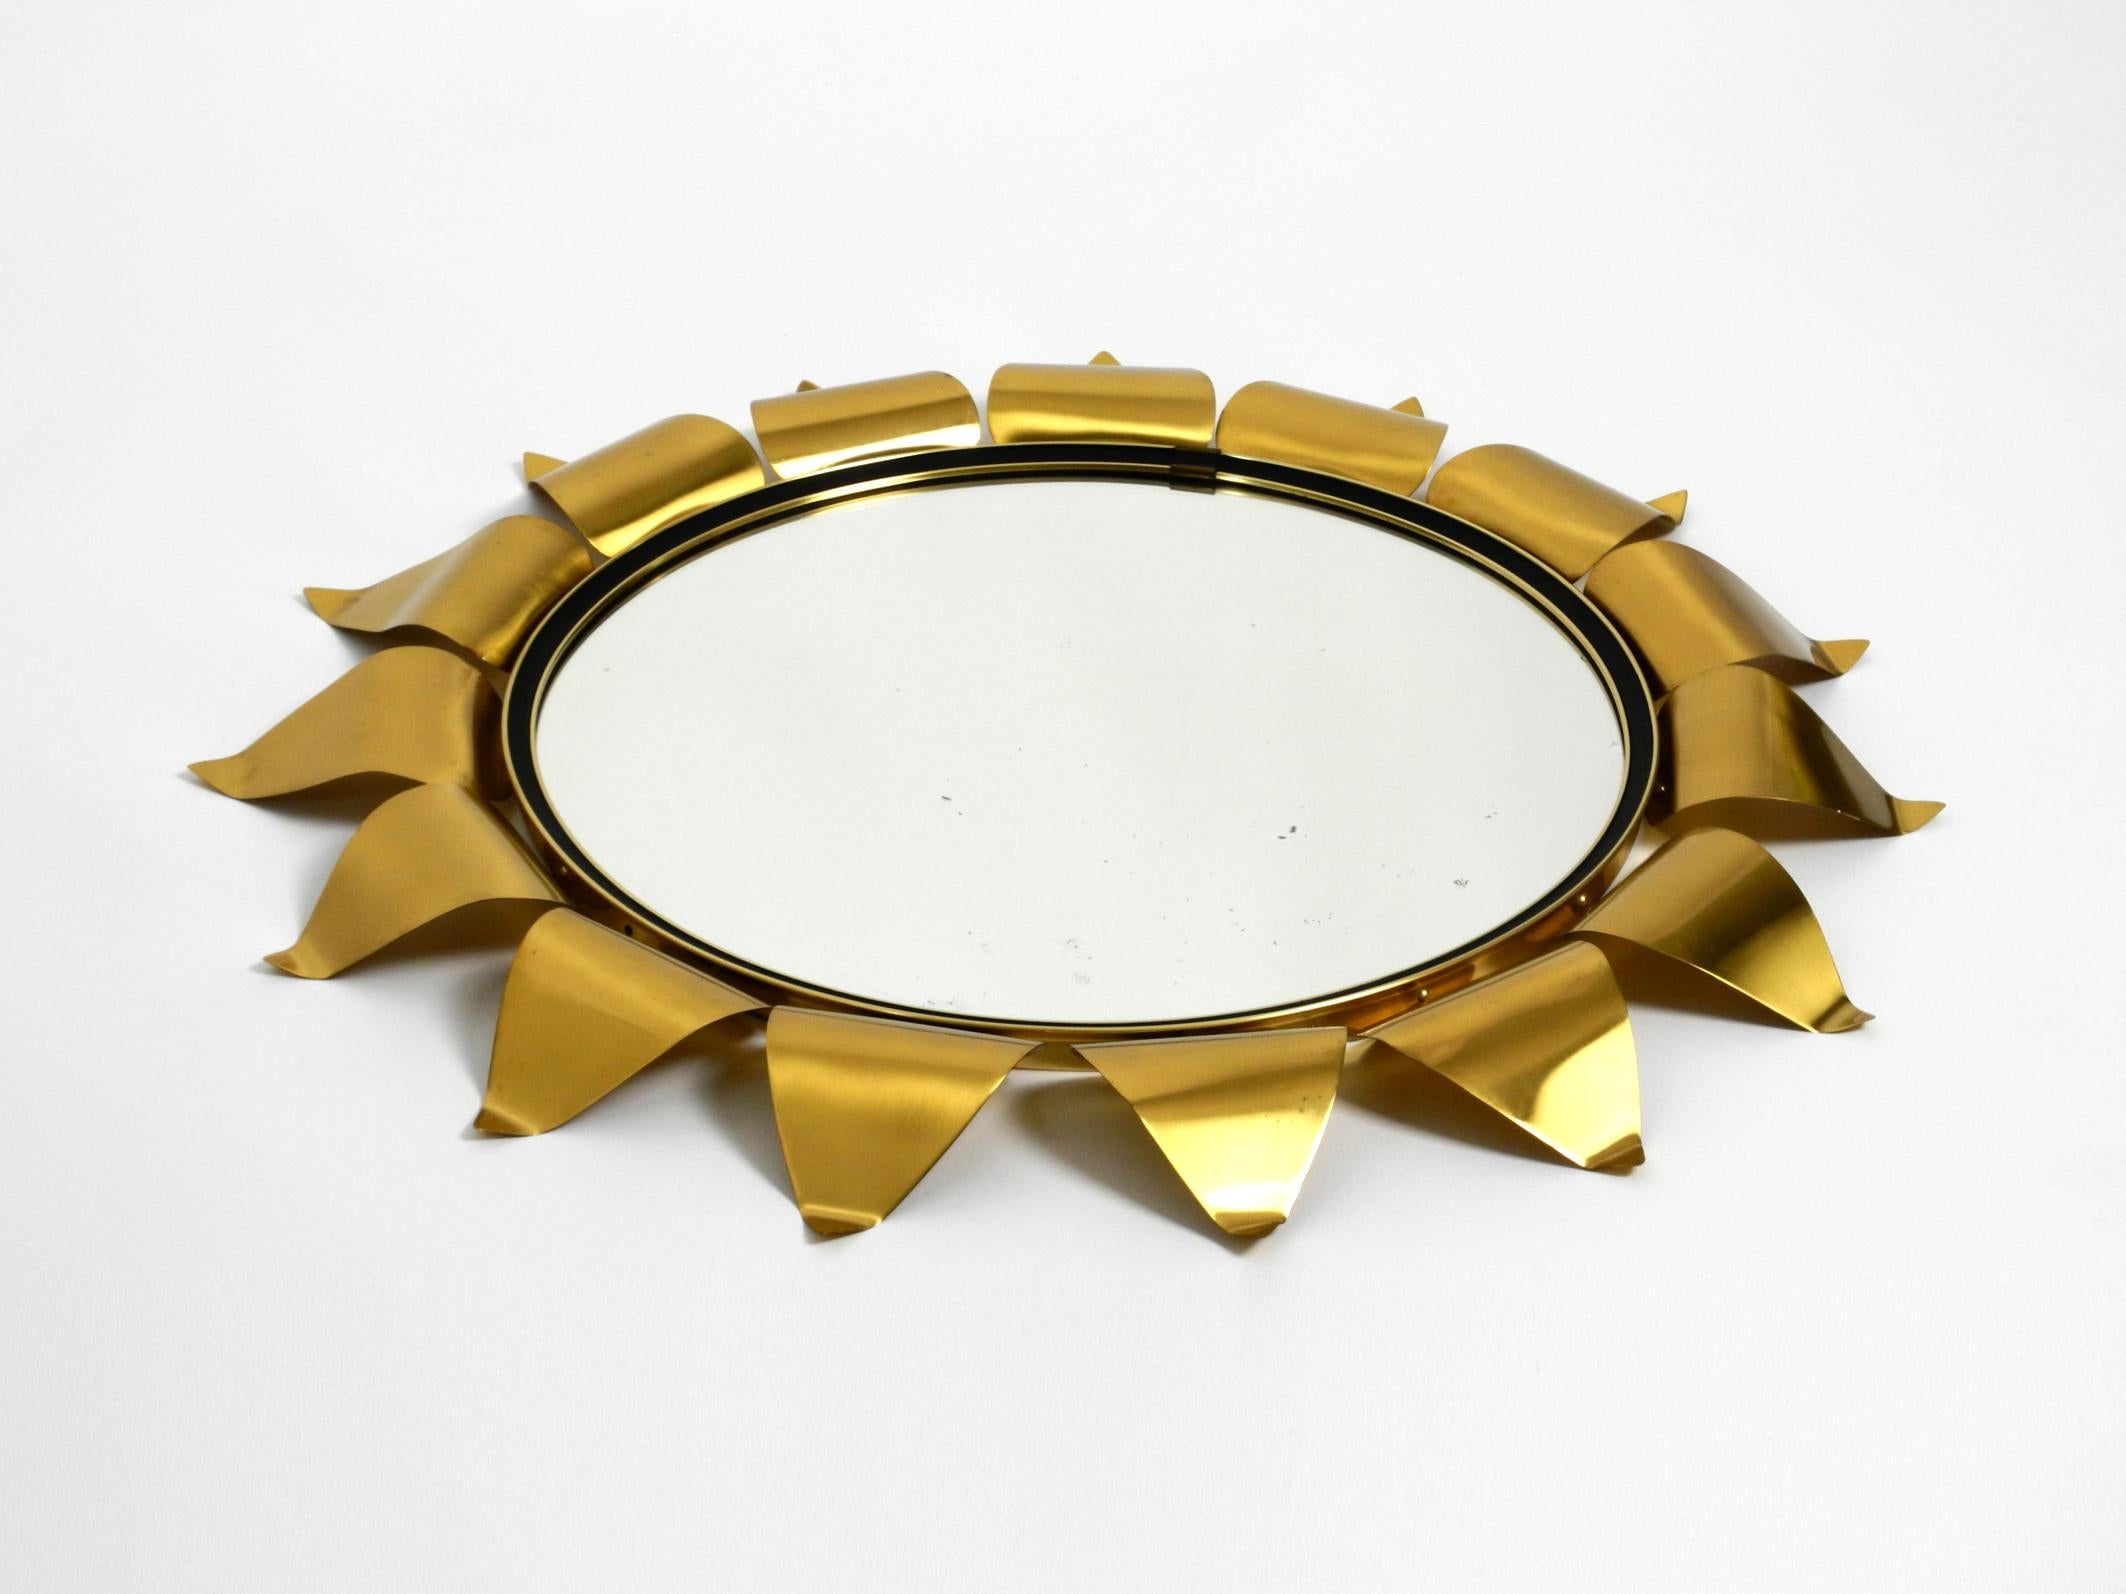 Extraordinary Mid-Century Modern brass sunburst wall mirror.
Great minimalist design with a beautiful patina.
The shape is abstractly reminding of a sun or plant leaves.
Very good condition without damages.
No scratches on the mirror and not